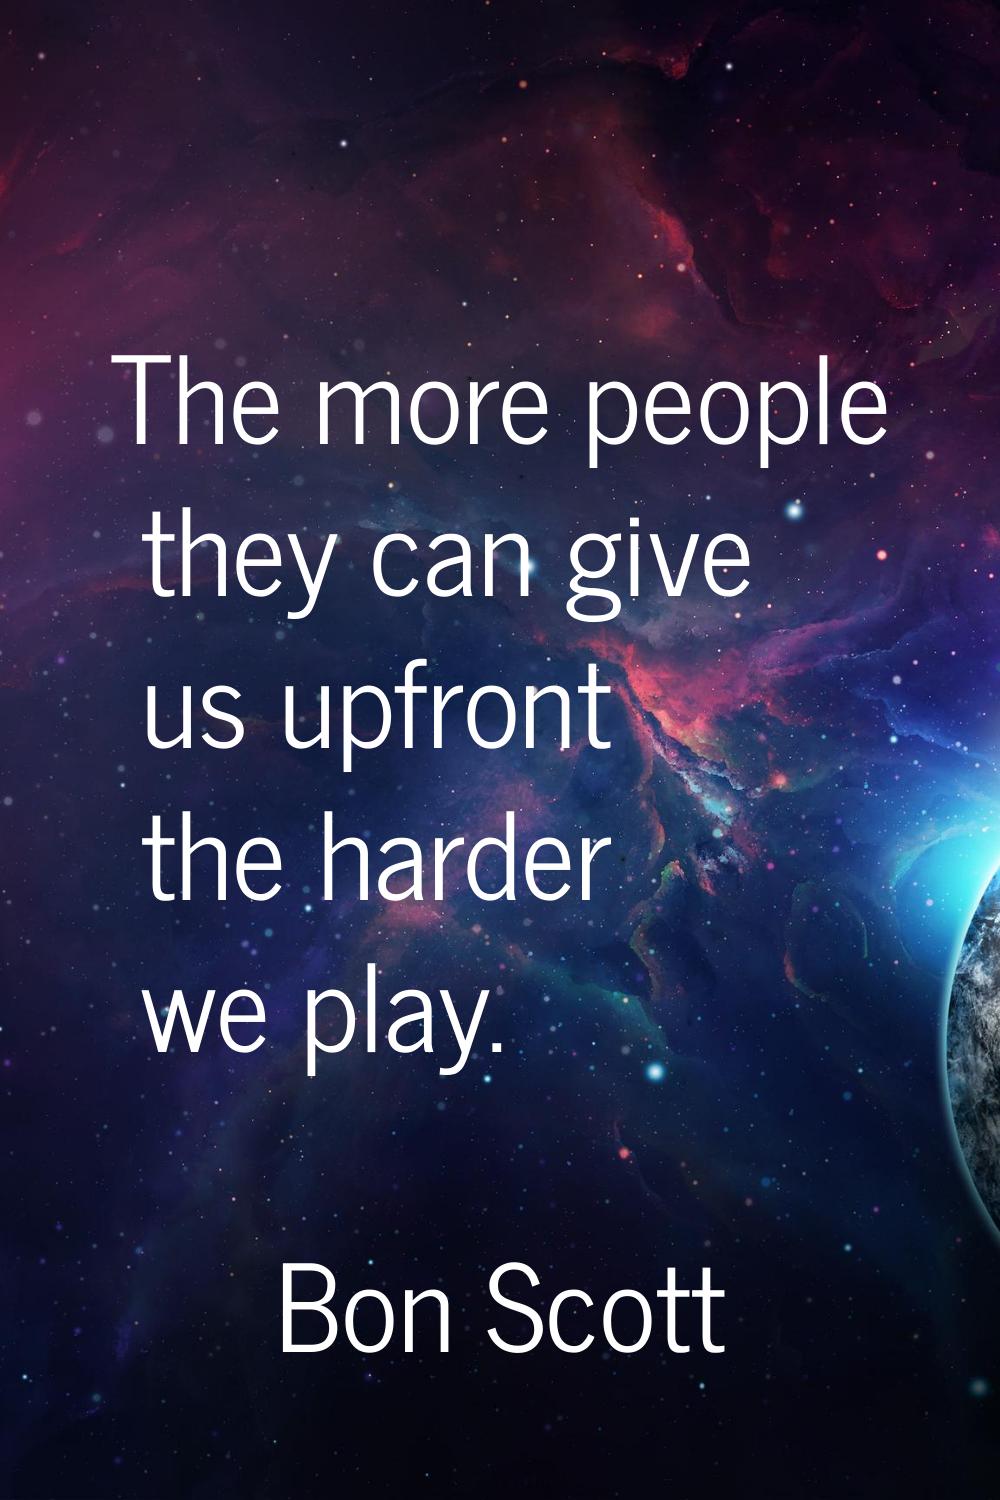 The more people they can give us upfront the harder we play.